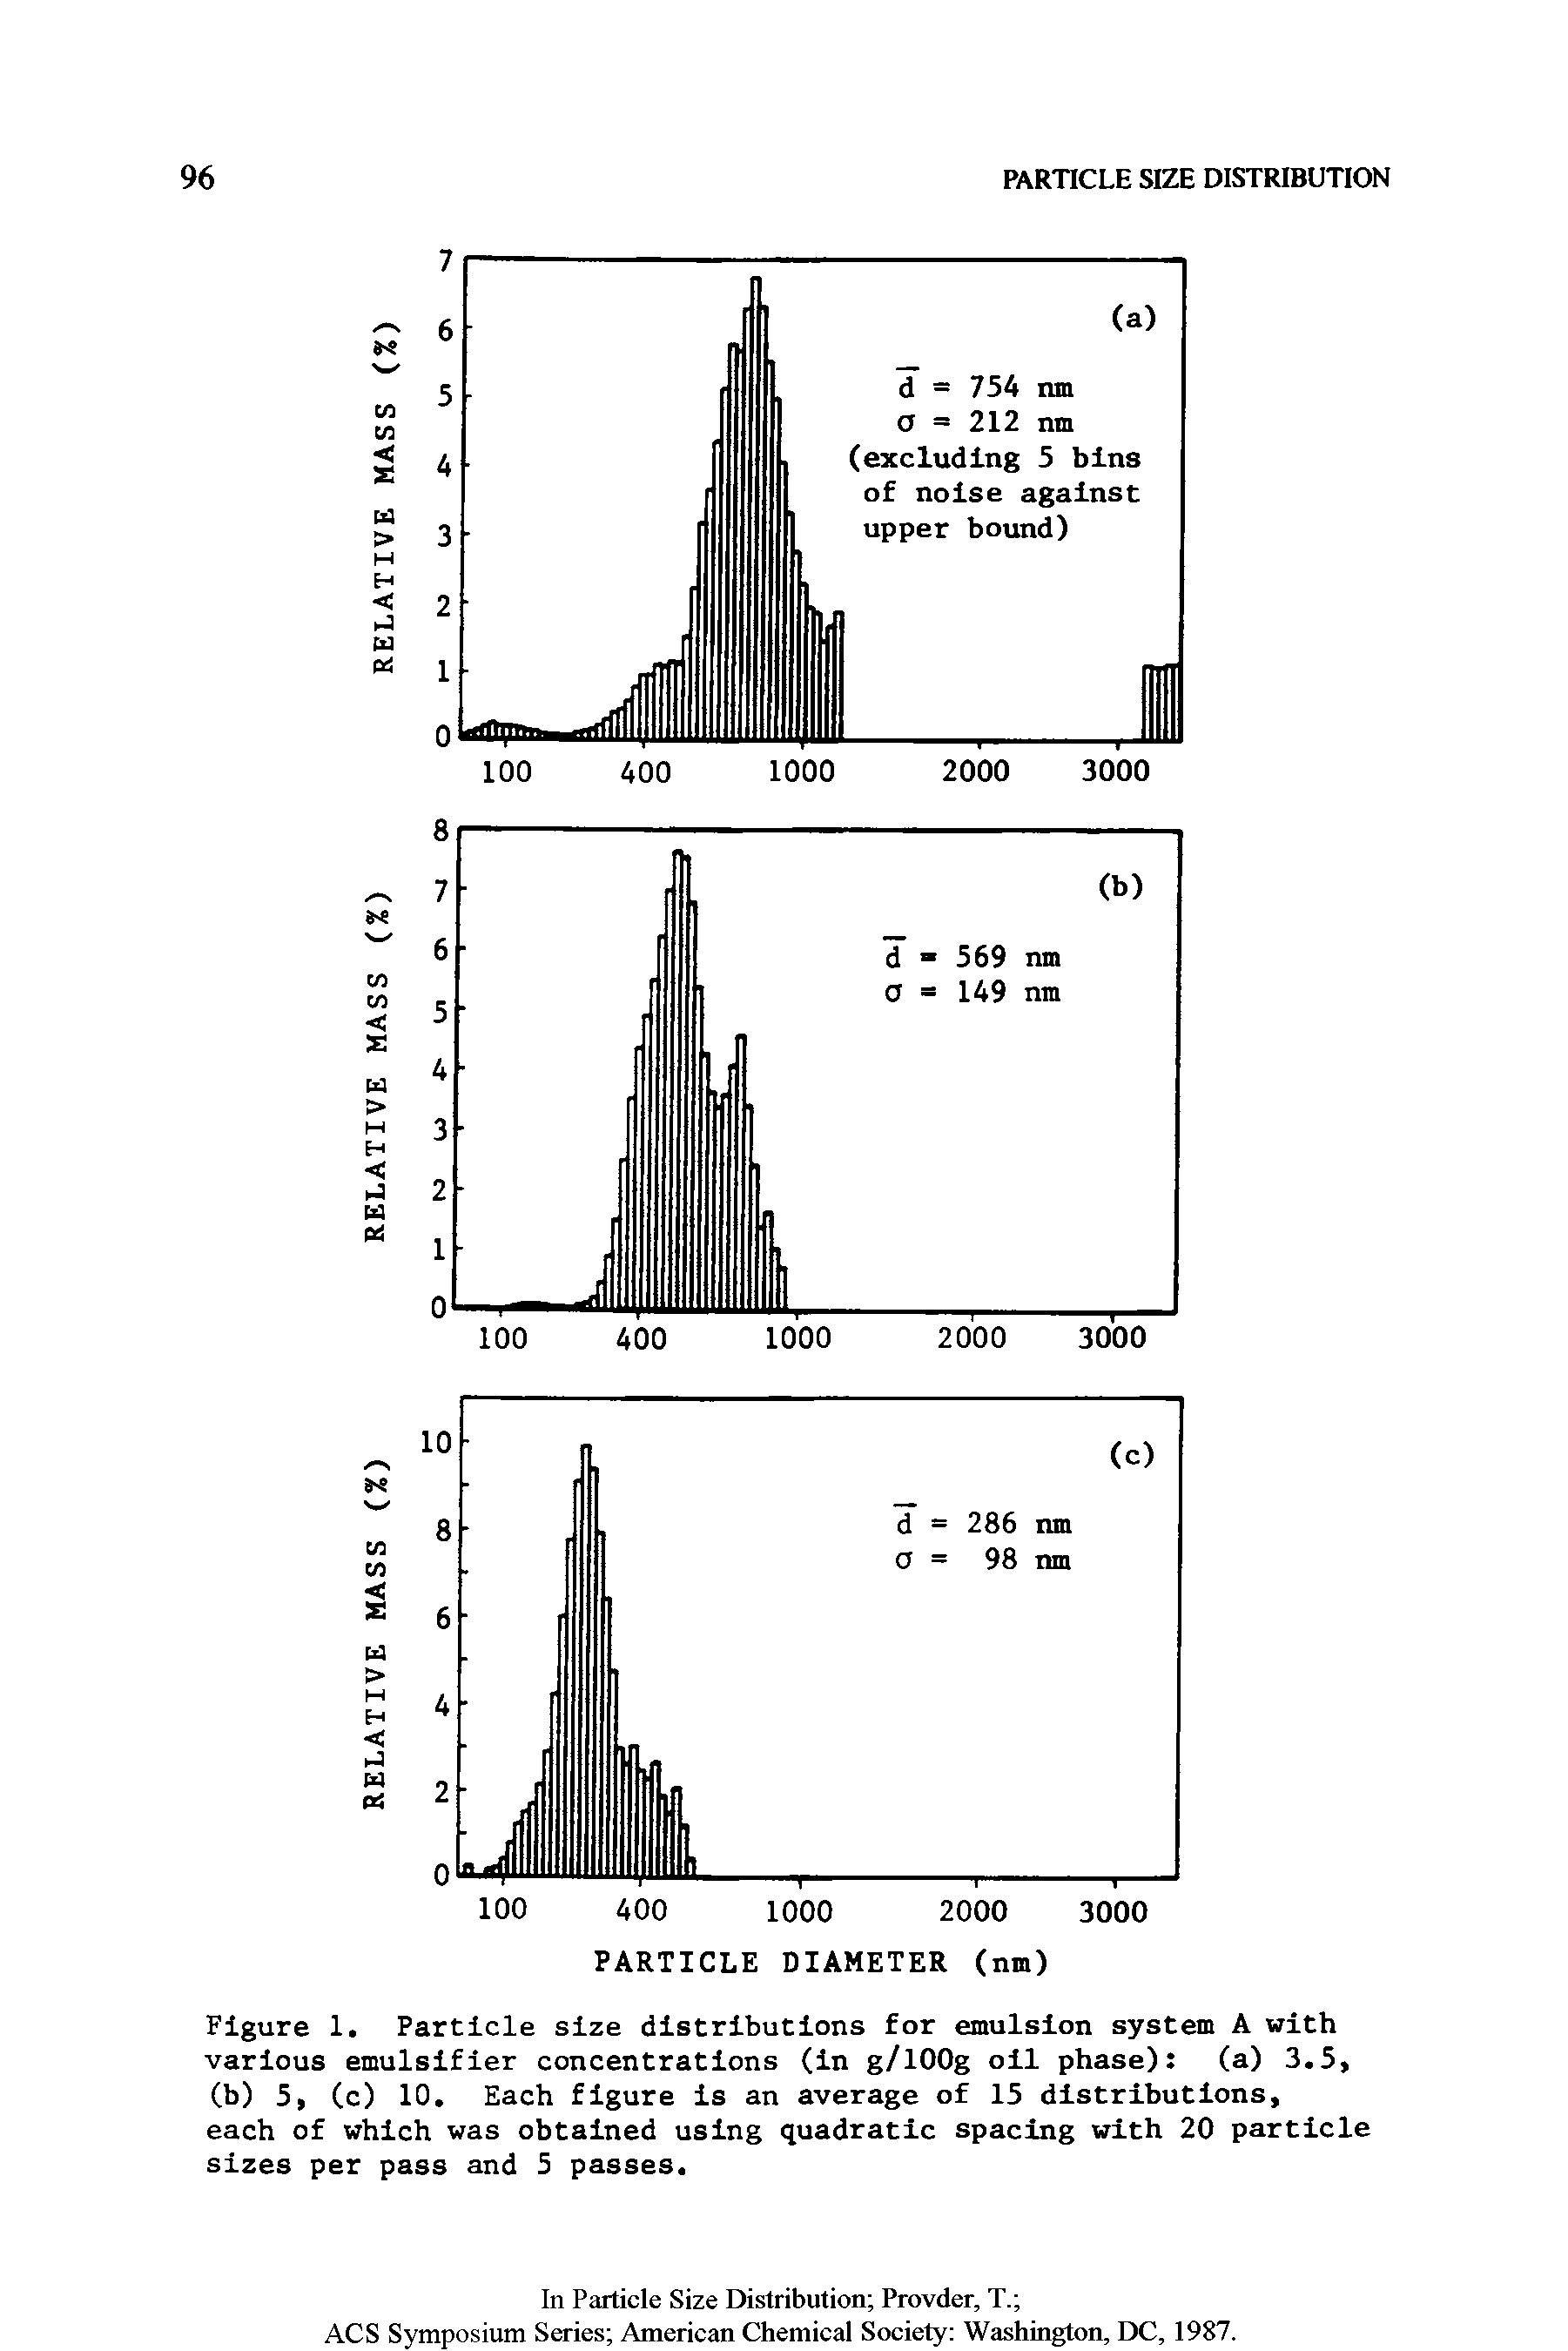 Figure 1. Particle size distributions for emulsion system A with various emulsifier concentrations (in g/lOOg oil phase) (a) 3.5, (b) 5, (c) 10. Each figure is an average of 15 distributions, each of which was obtained using quadratic spacing with 20 particle sizes per pass and 5 passes.